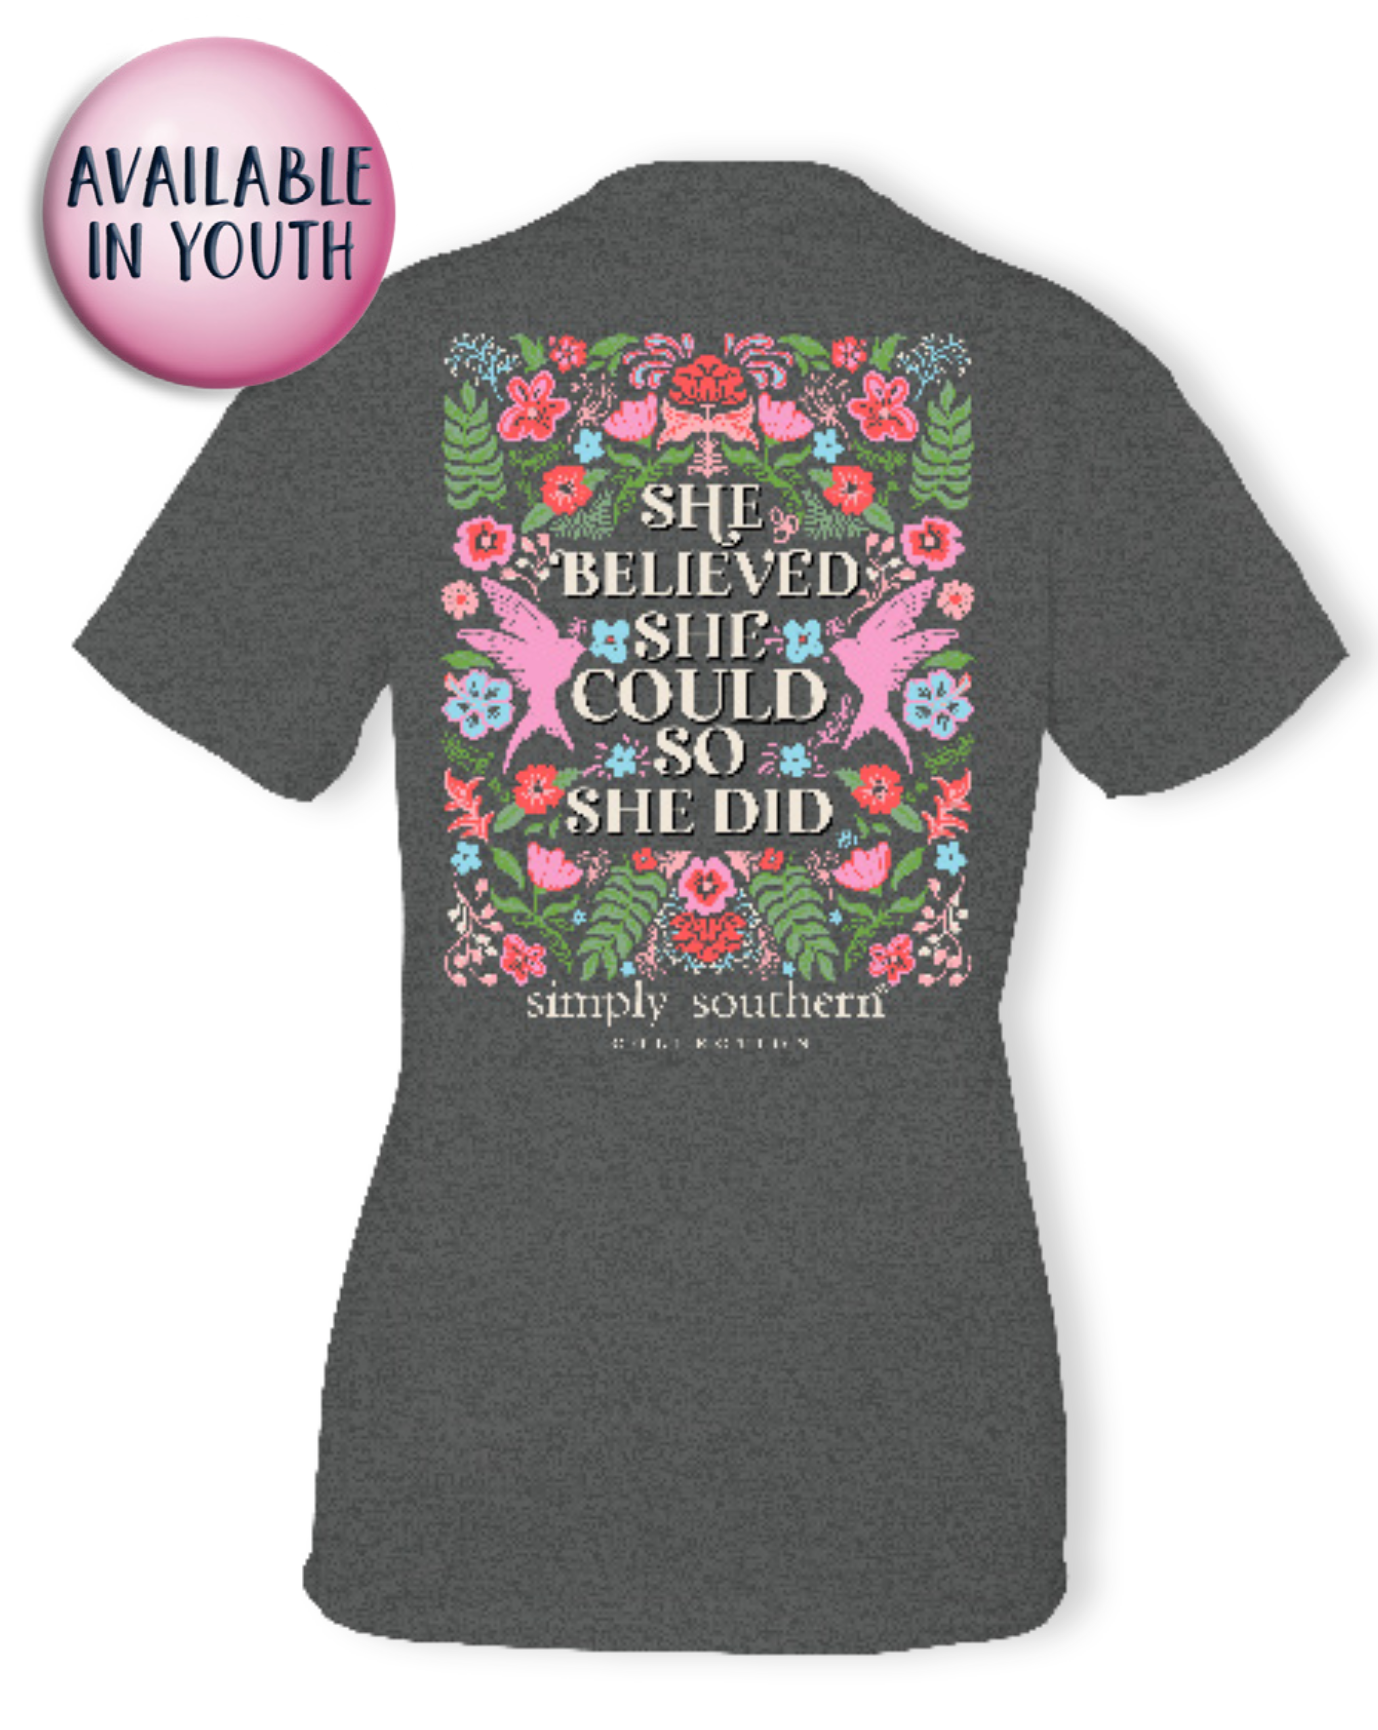 'She Believed She Could, So She Did' Short Sleeve Tee by Simply Southern